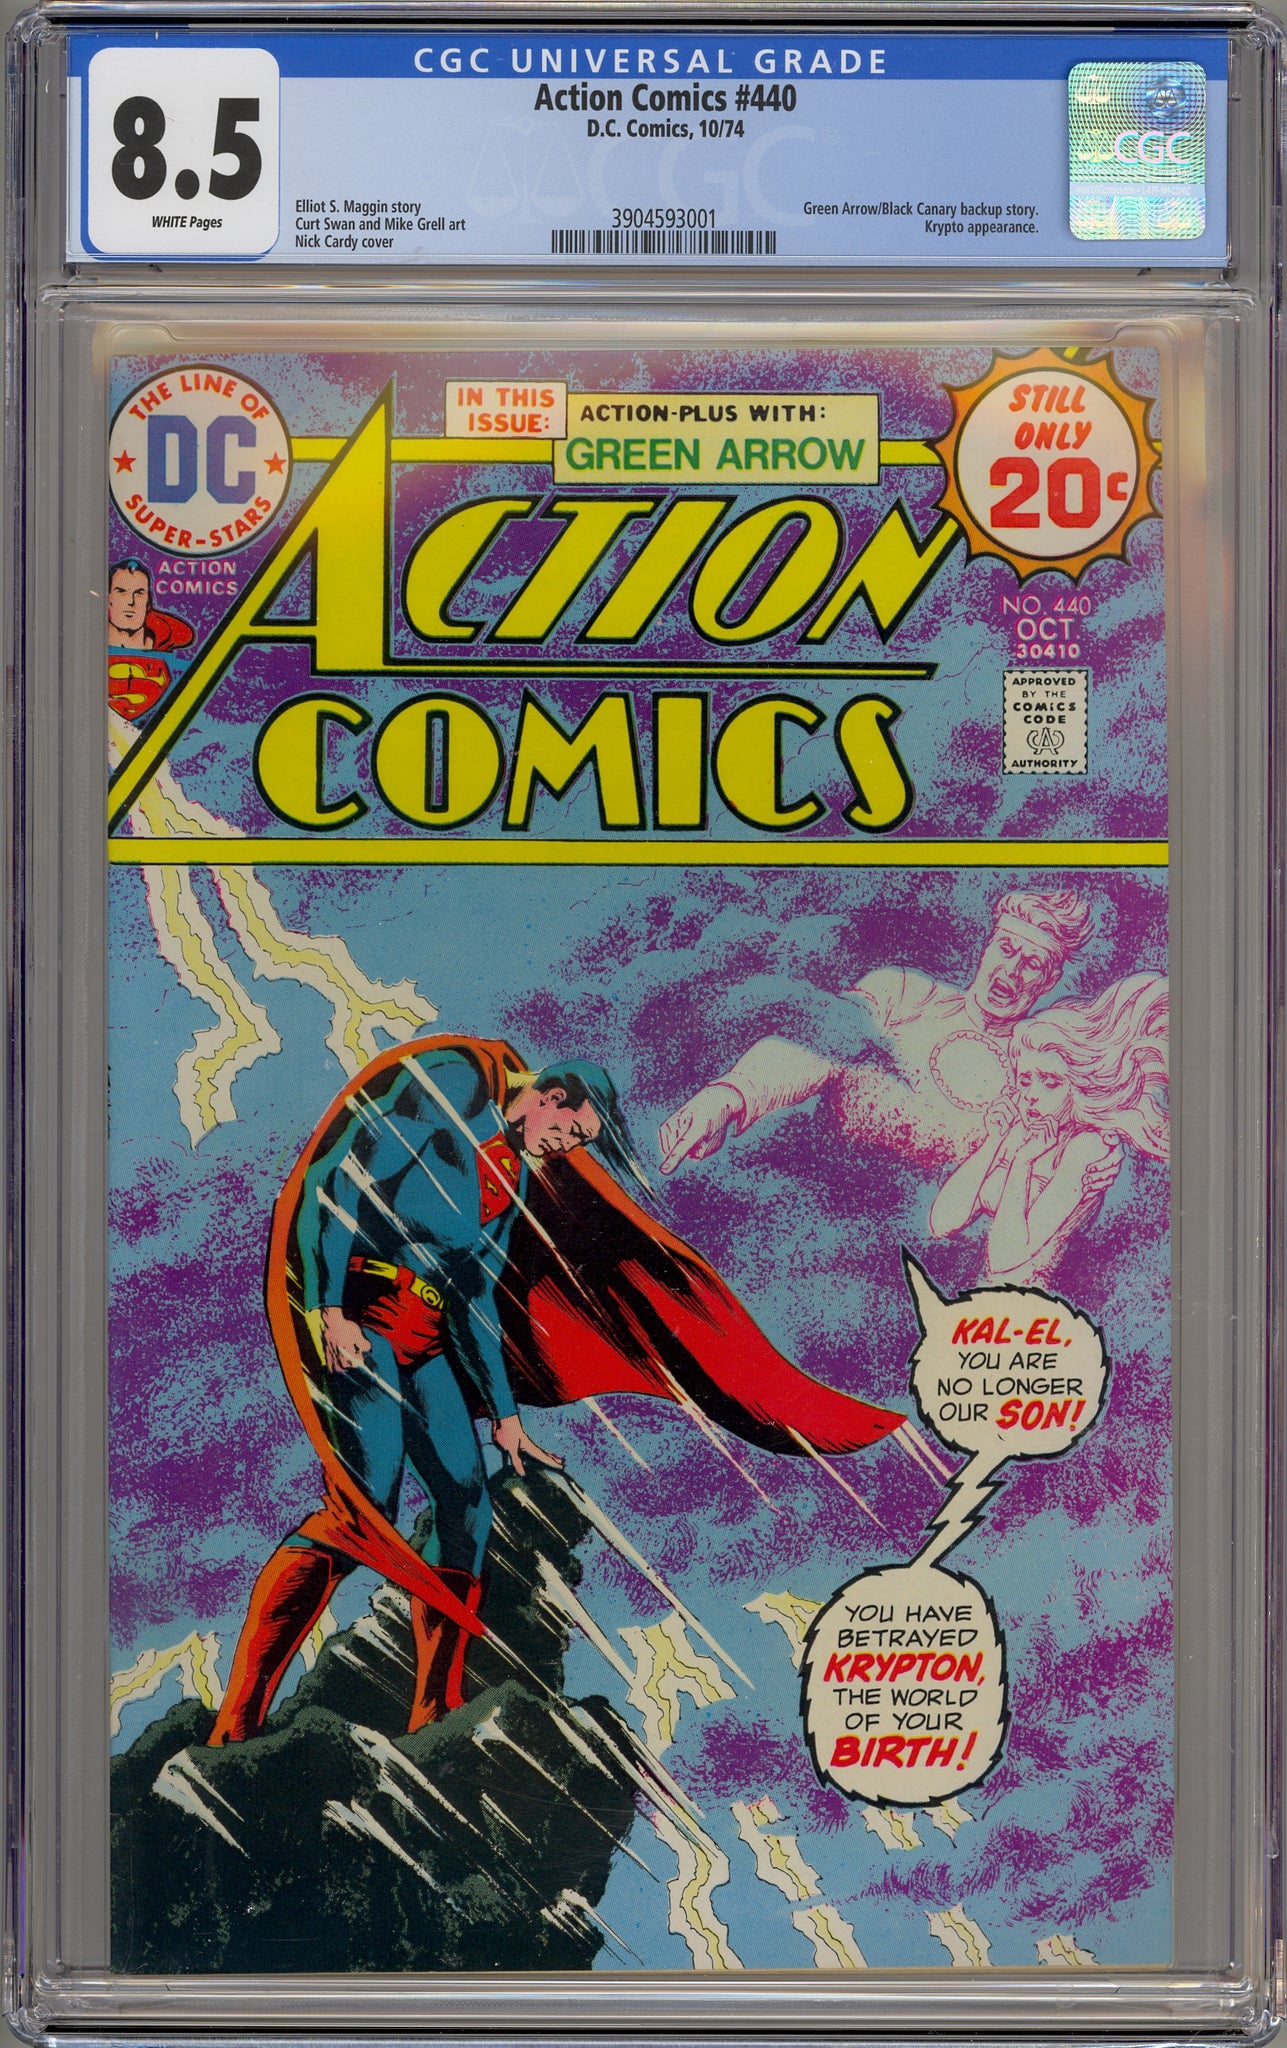 Action Comics #440 (1974) Mike Grell Green Arrow